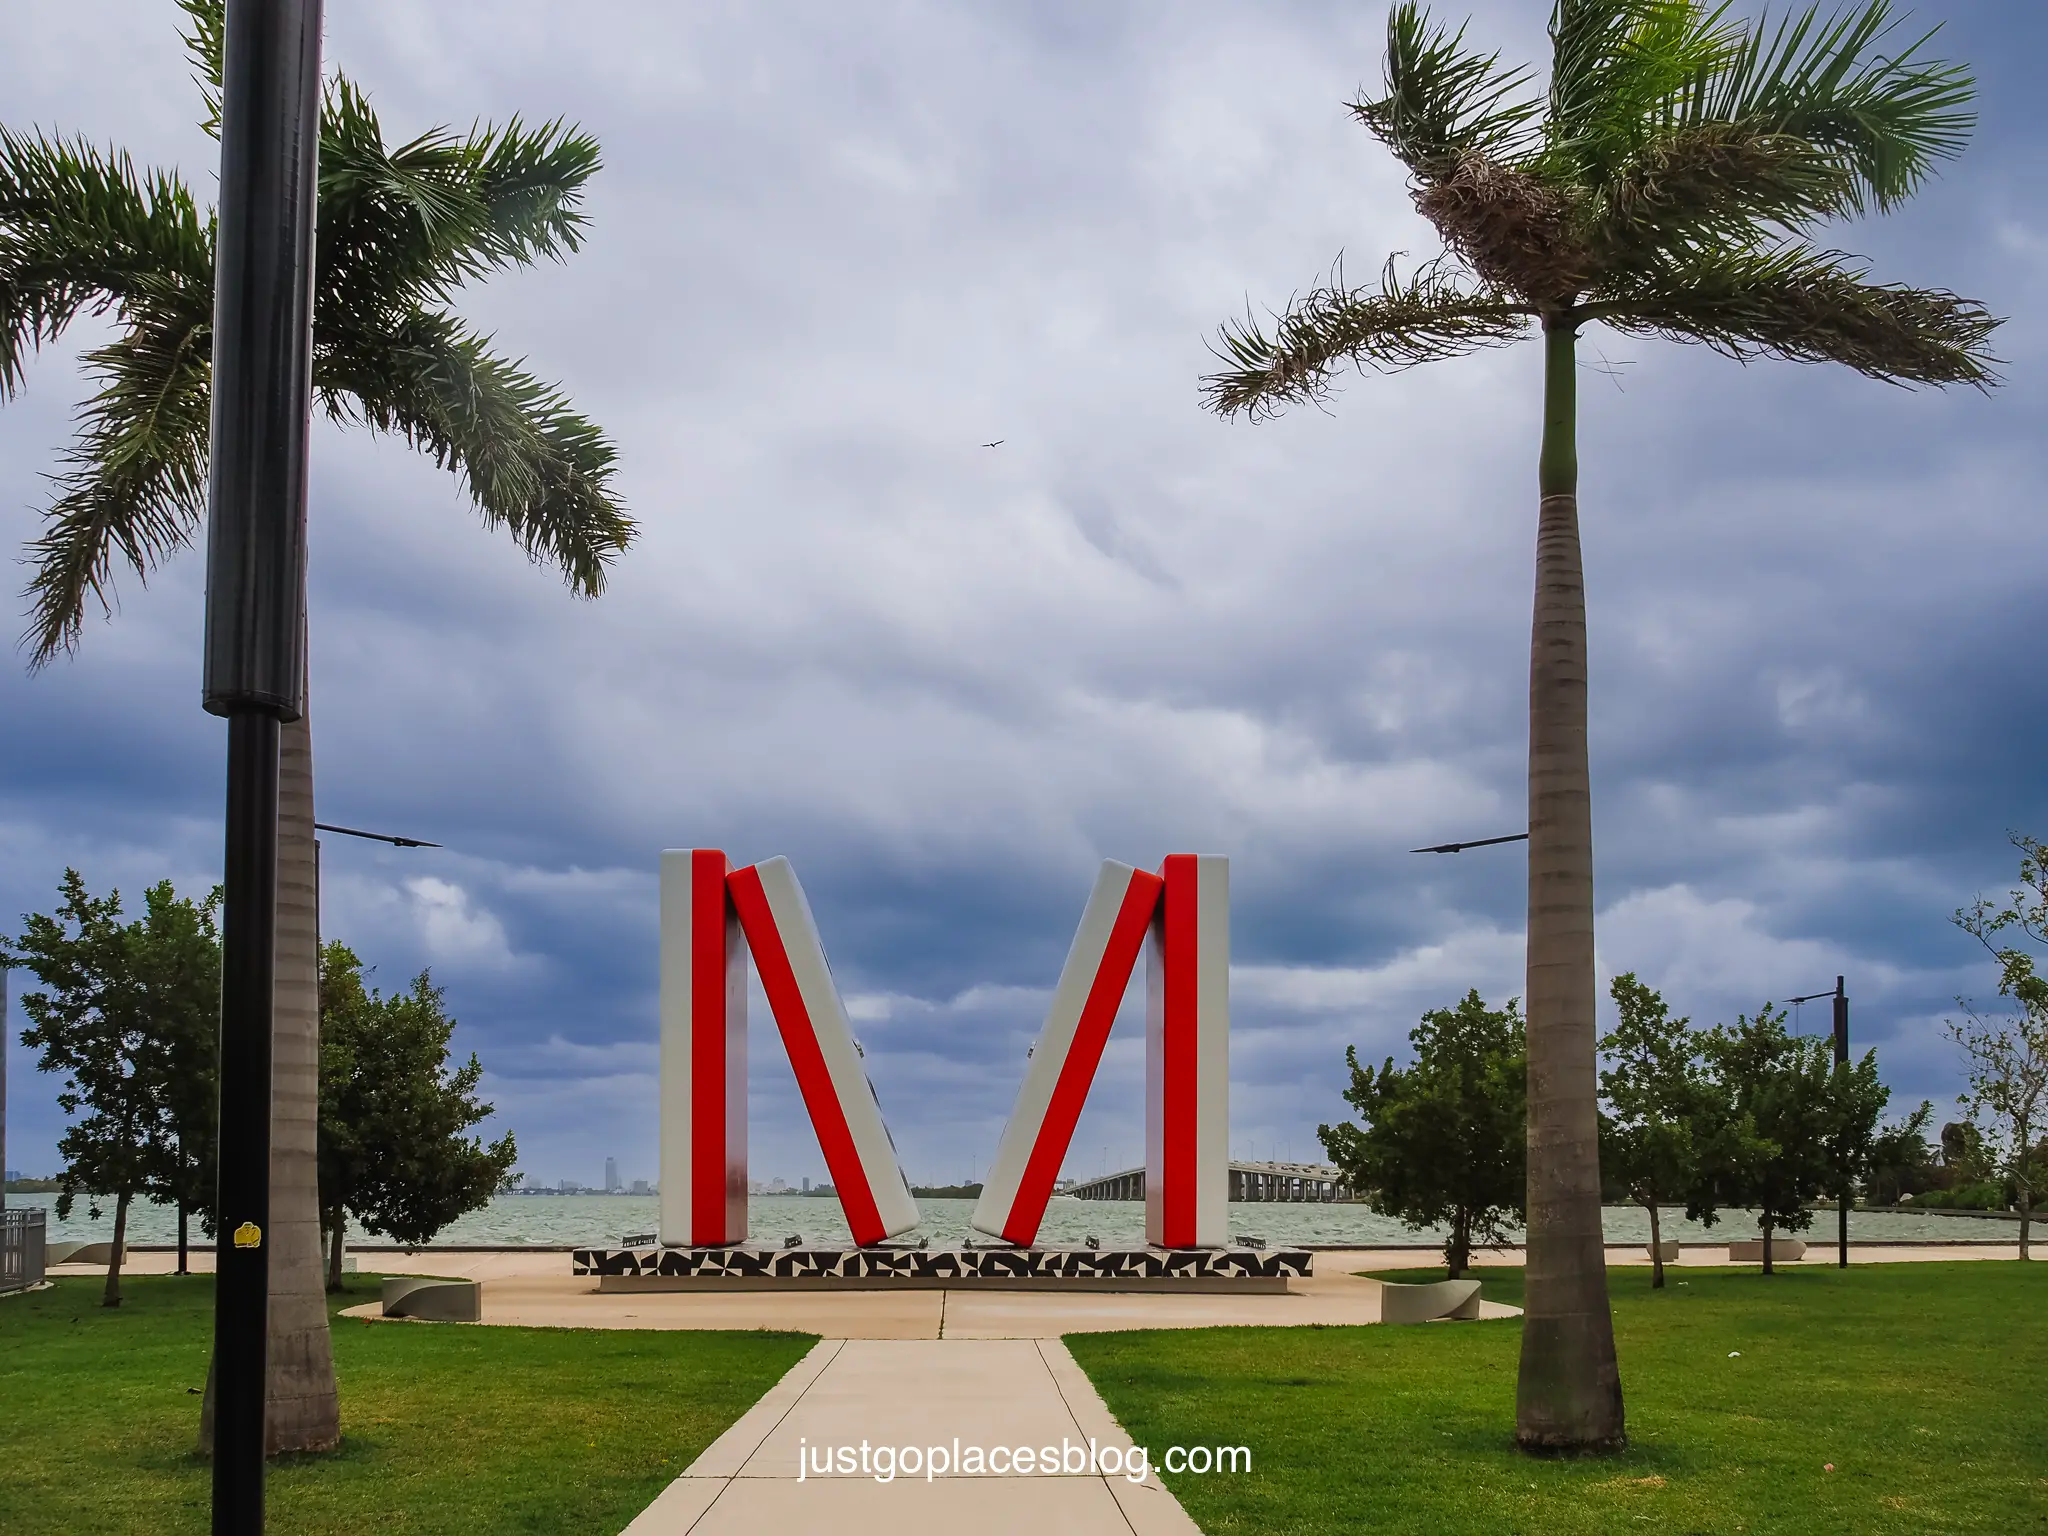 Statute of the letter M made with dominos in Miami